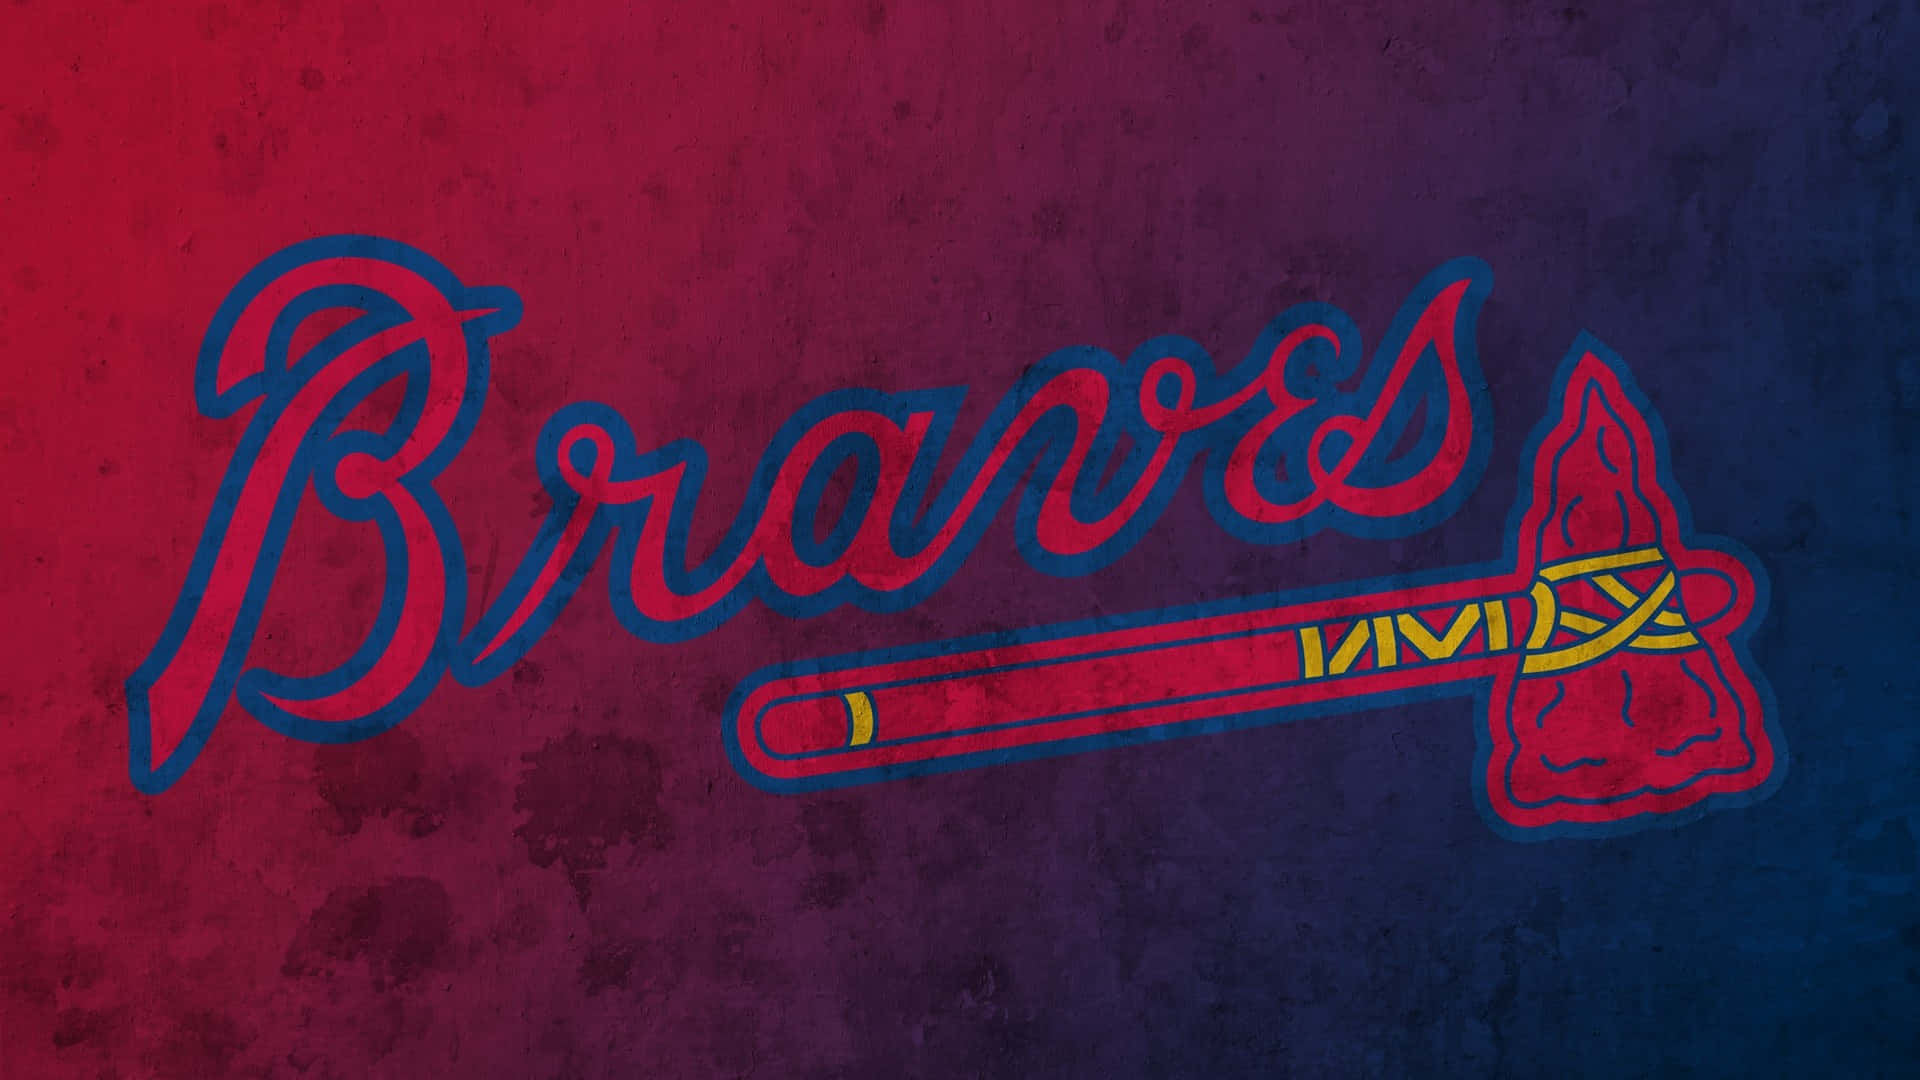 Download A fan of the Atlanta Braves shows off their spirit with